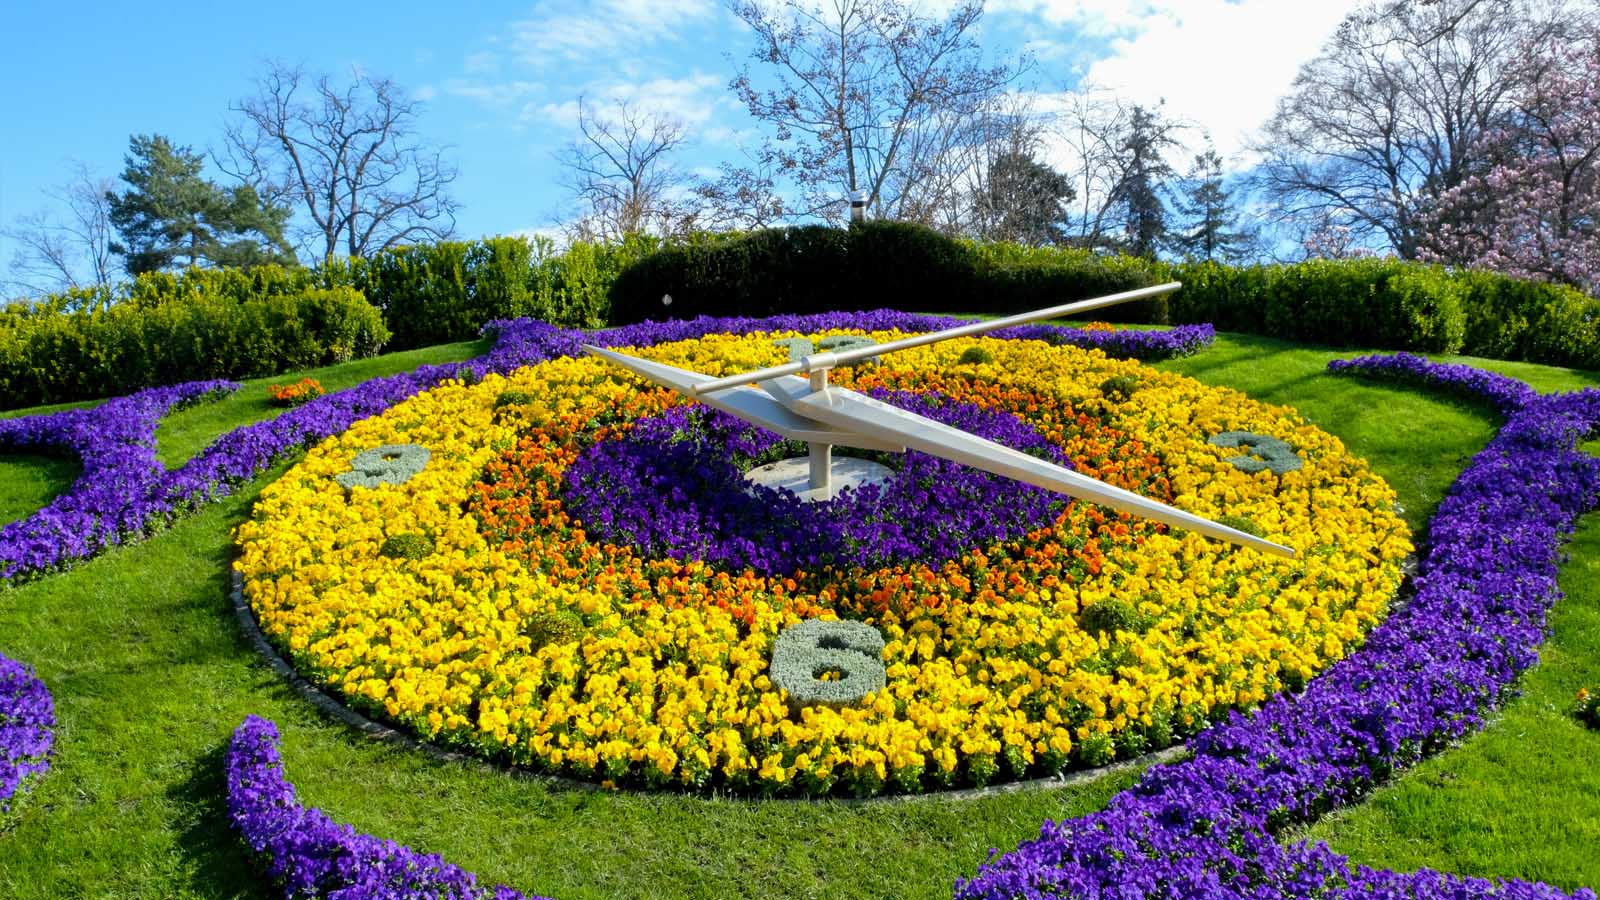 The large Flower clock of Geneva made of yellow, purple and orange flowes and green grass on a day with blue sky what to do in Geneva